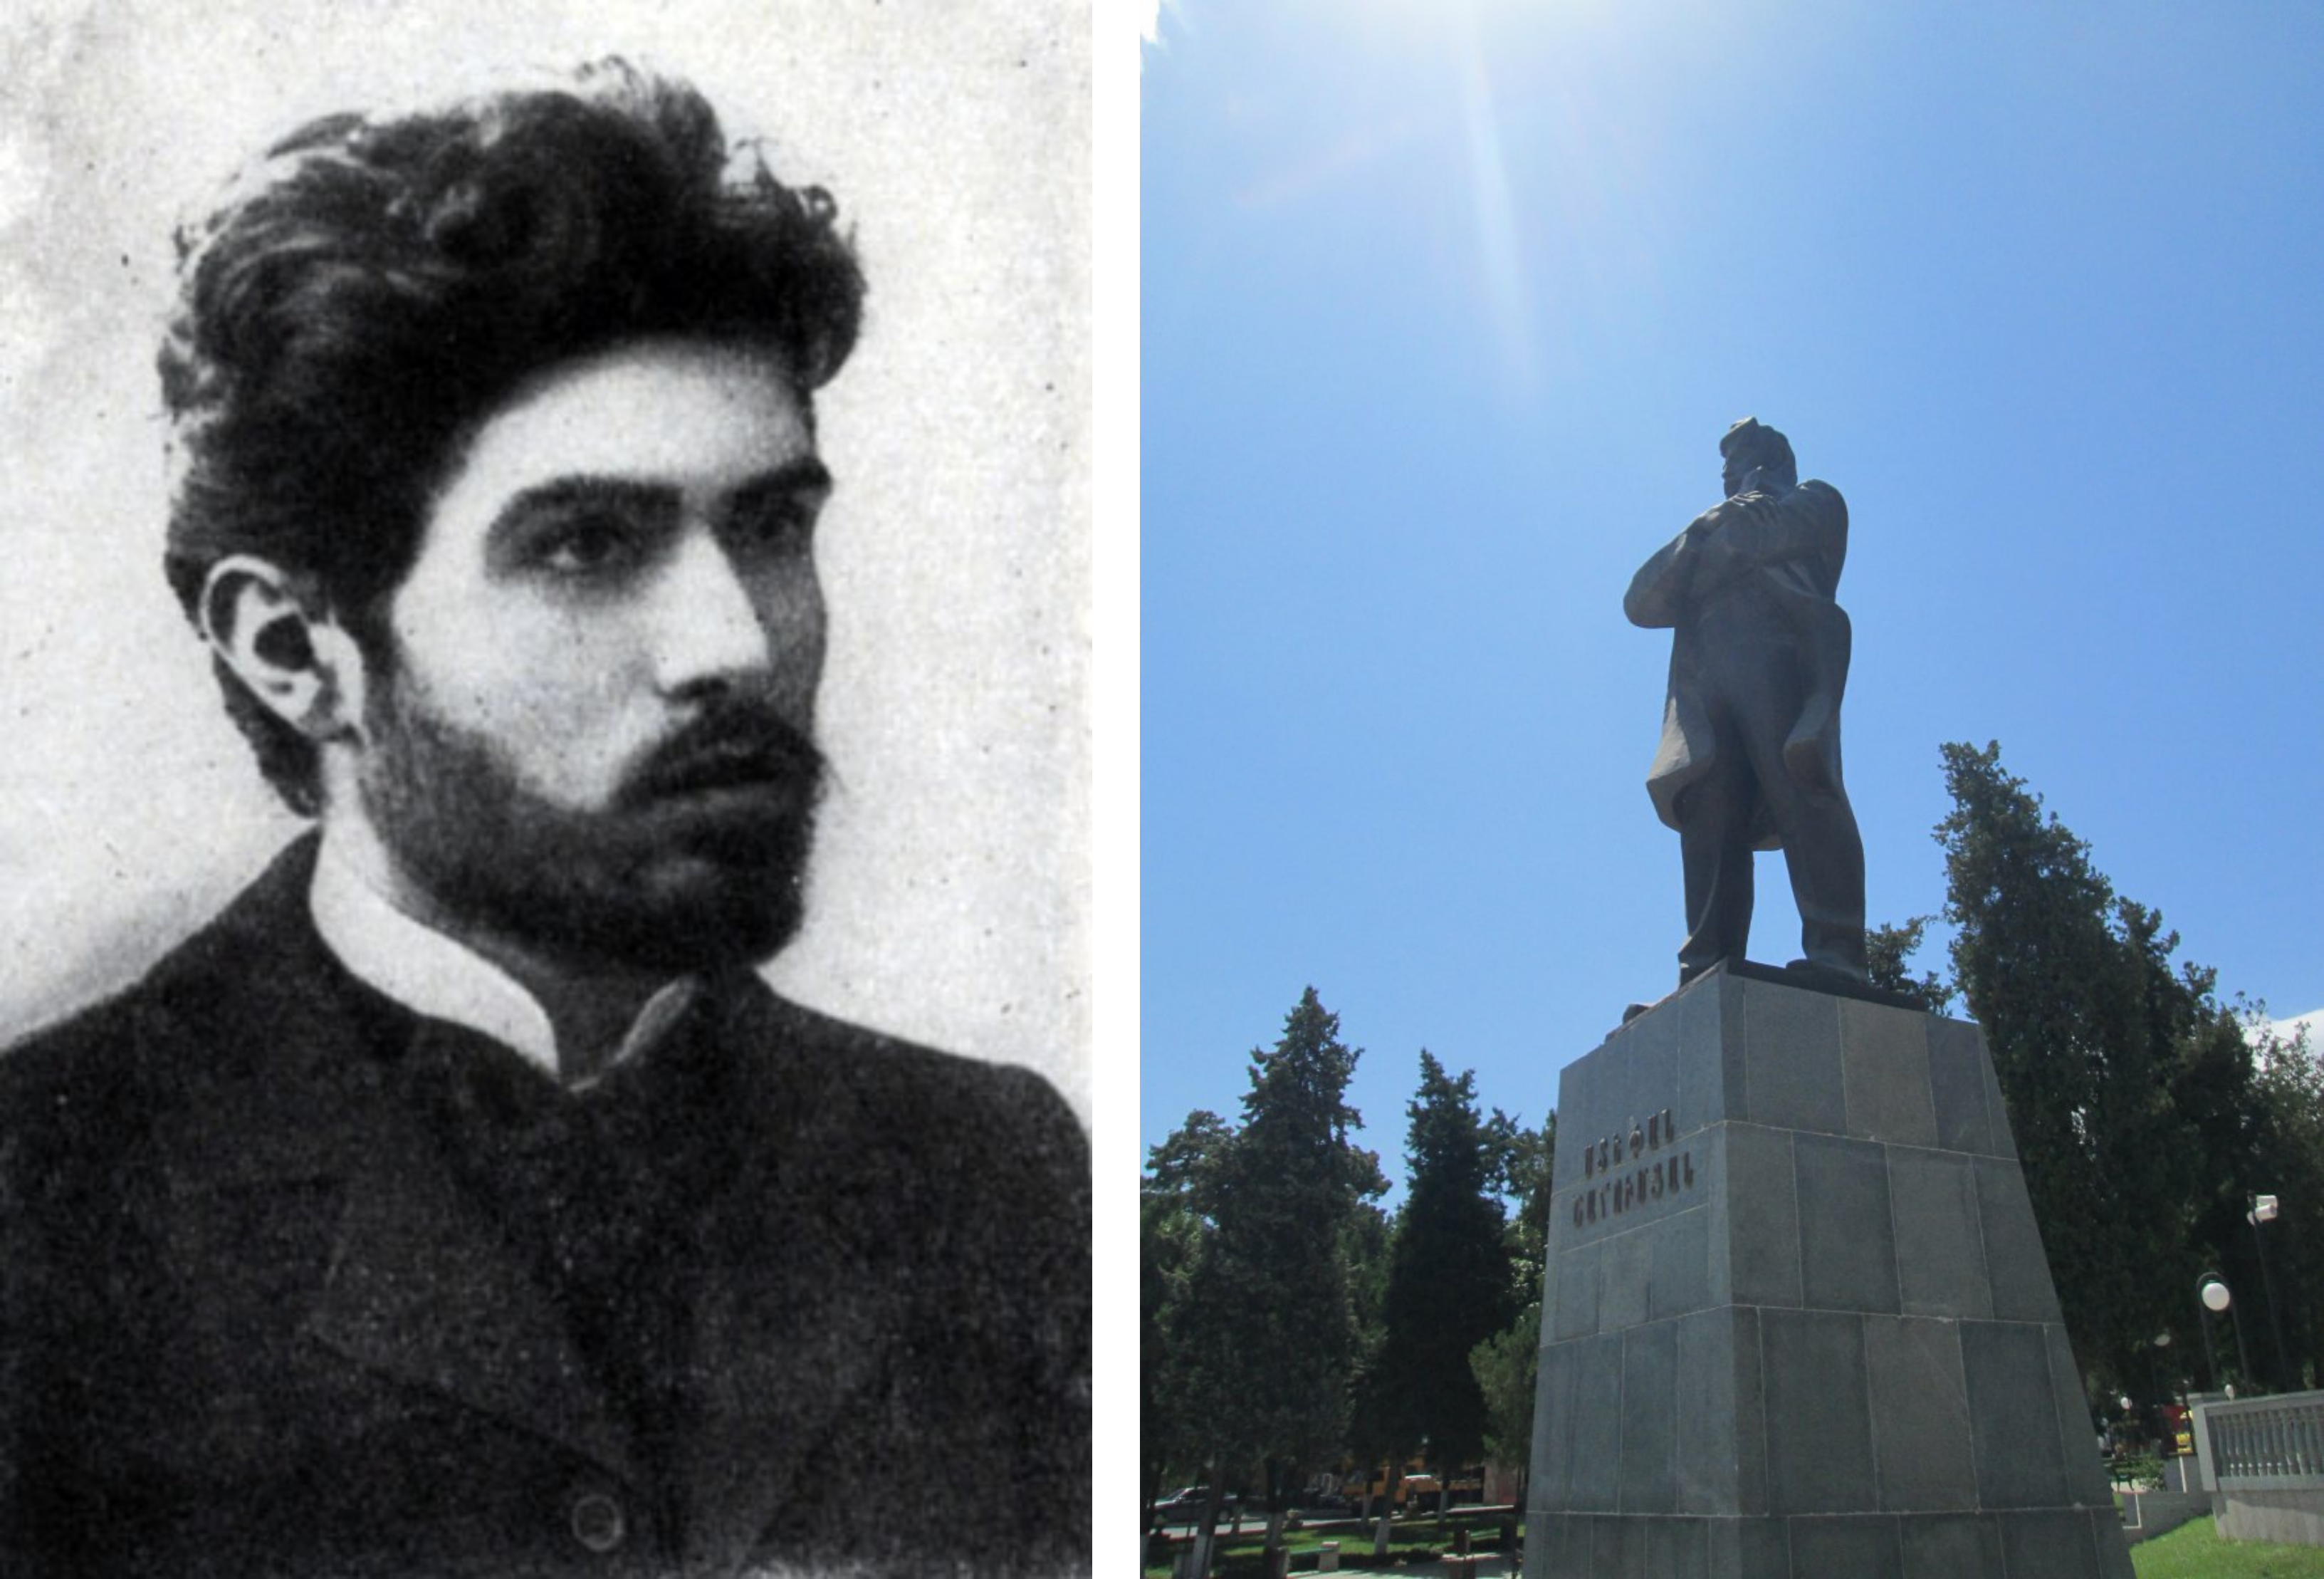 On the left, Stepan Shahumyan. On the right, a statue of Stepan Shahumyan.